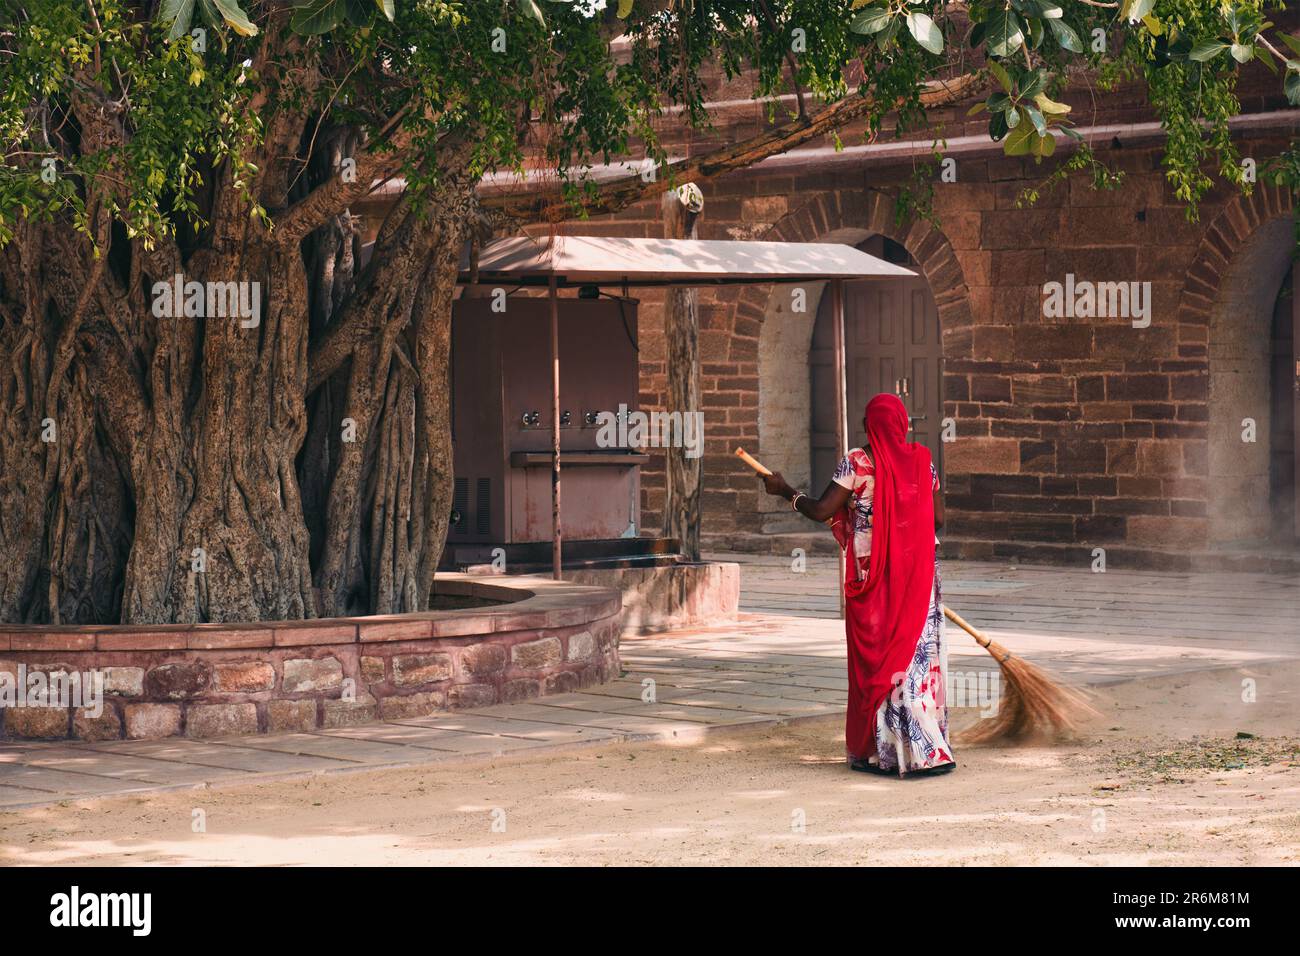 Woman sweeping cleaning the ground in Mehrangarh fort. Jodhpur, Rajasthan, India Stock Photo